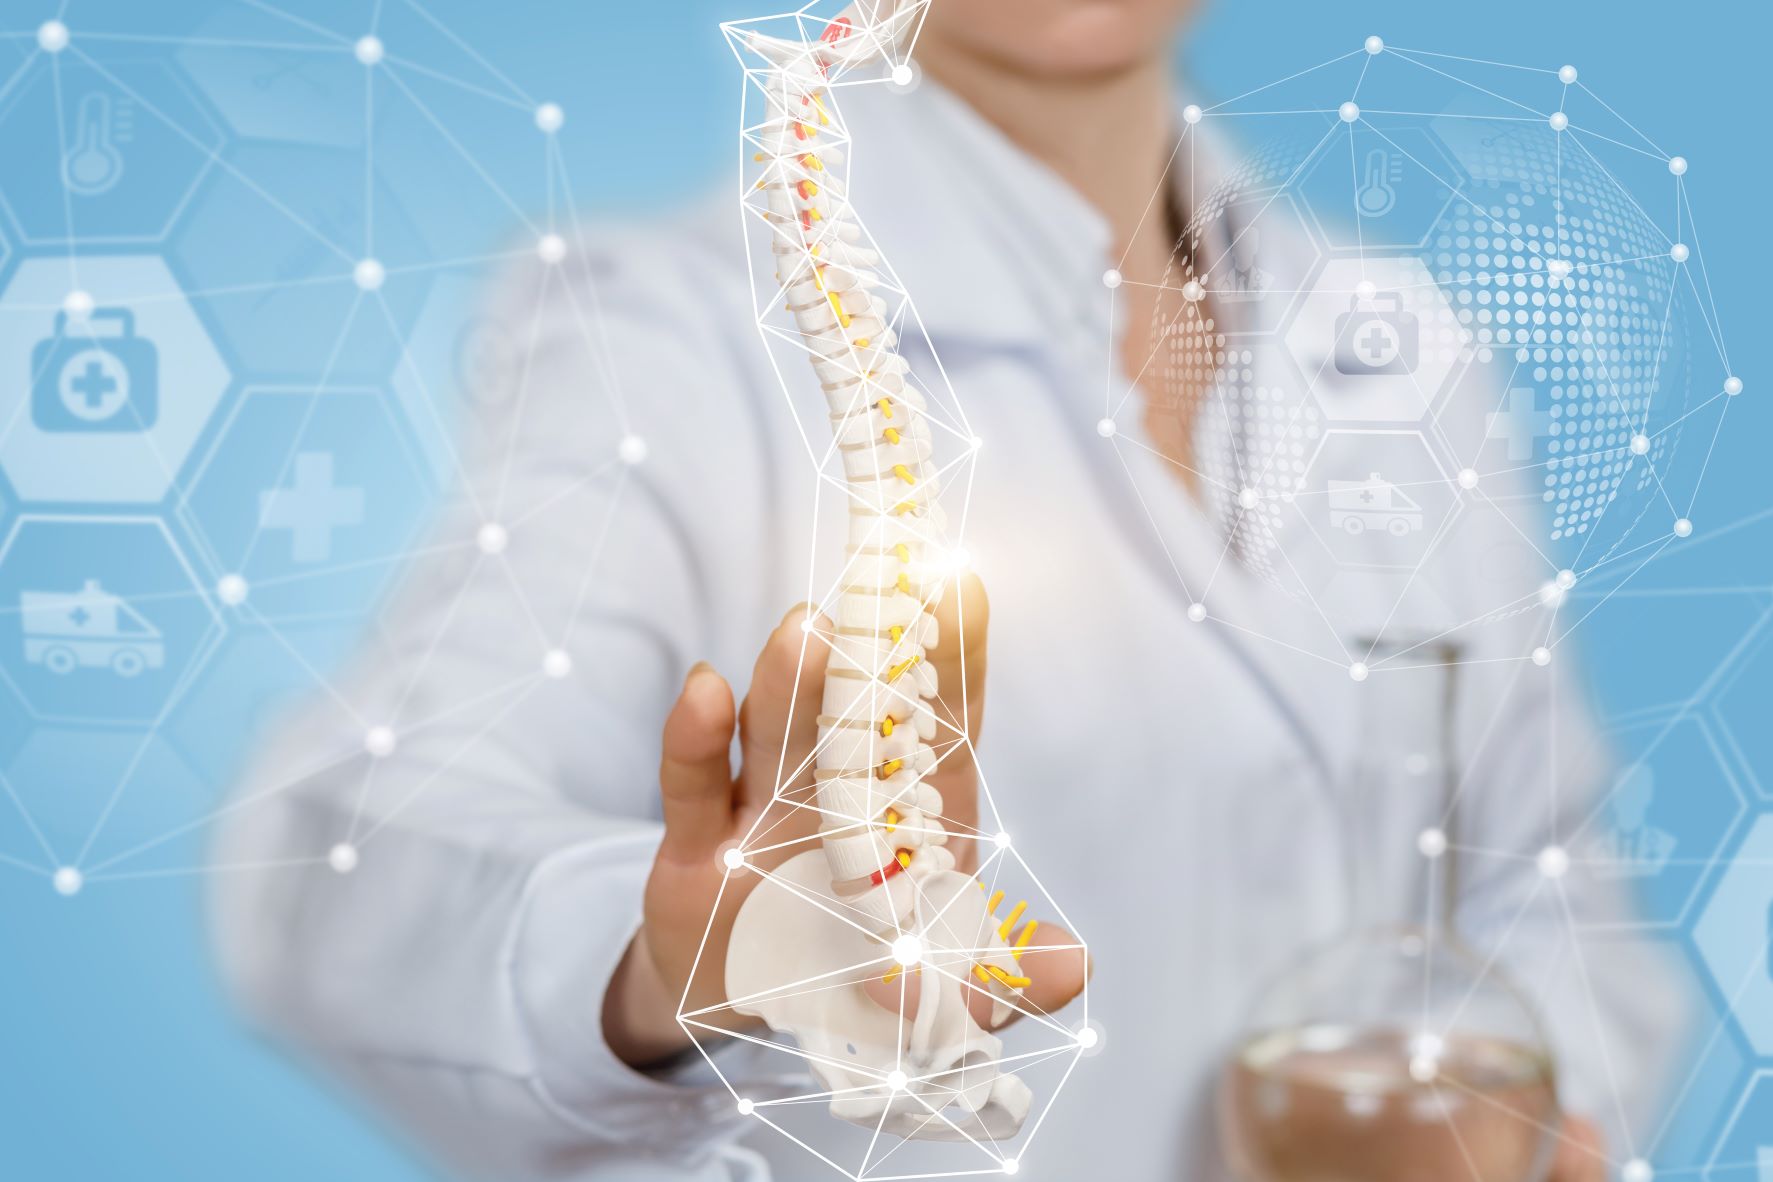 Stock Image of Scientist Holding Model of Human Spine with Graphical Overlays Evoking the Medical Industry